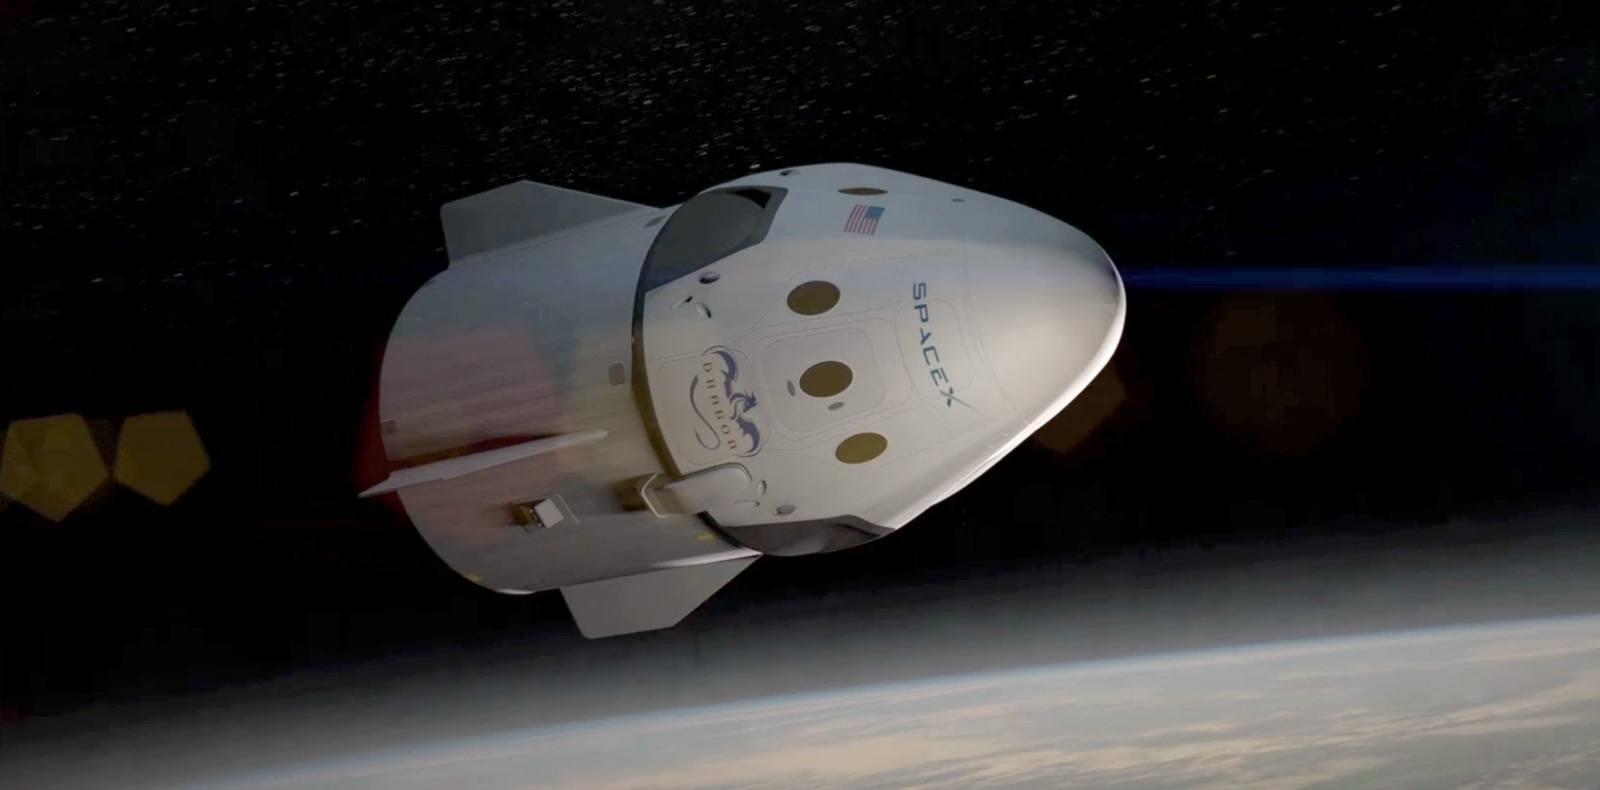 SpaceX’ private spaceflight to the moon is postponed until 2019